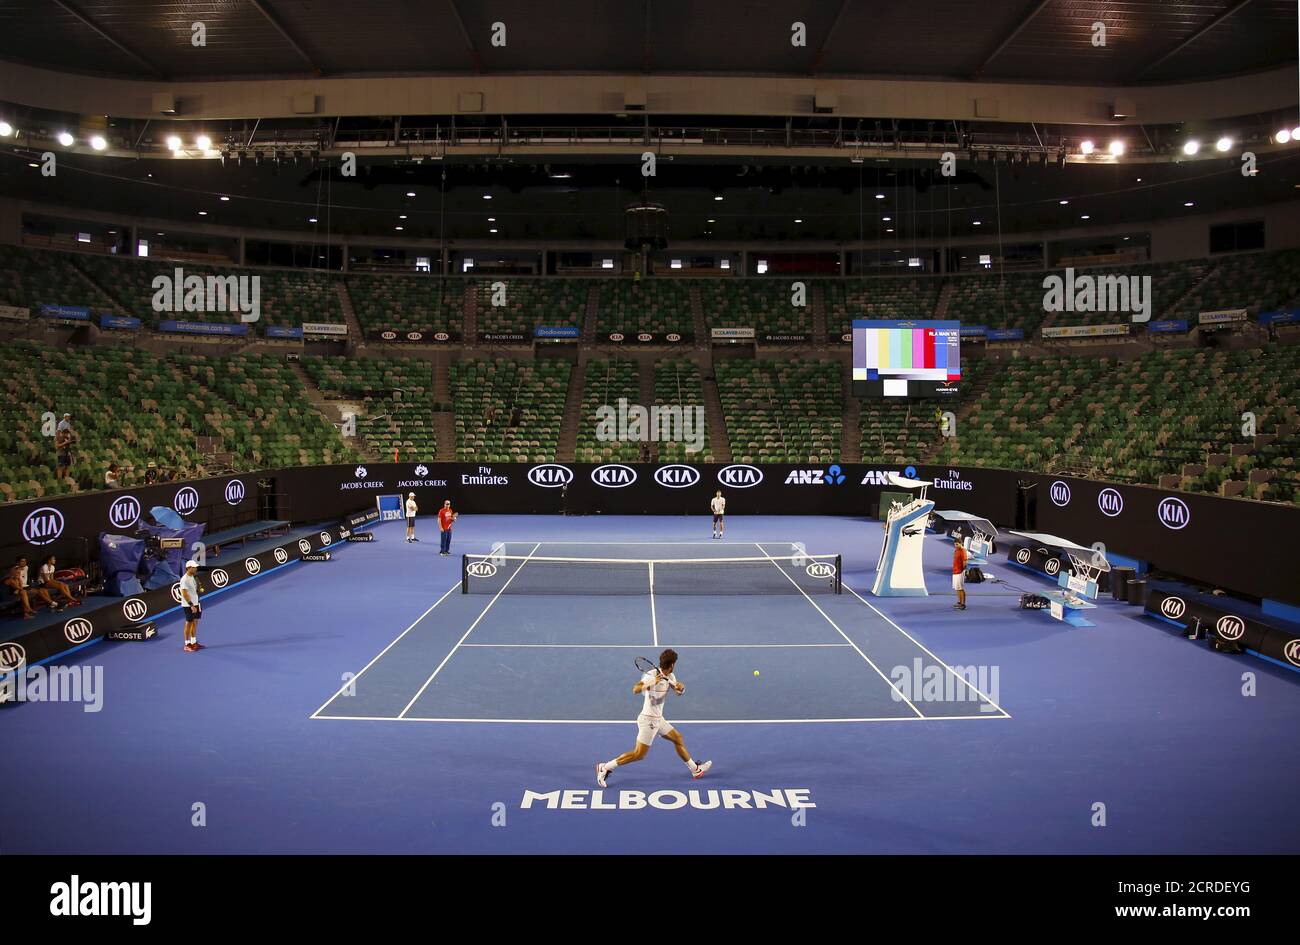 Rod Laver Arena Roof High Resolution Stock Photography and Images - Alamy